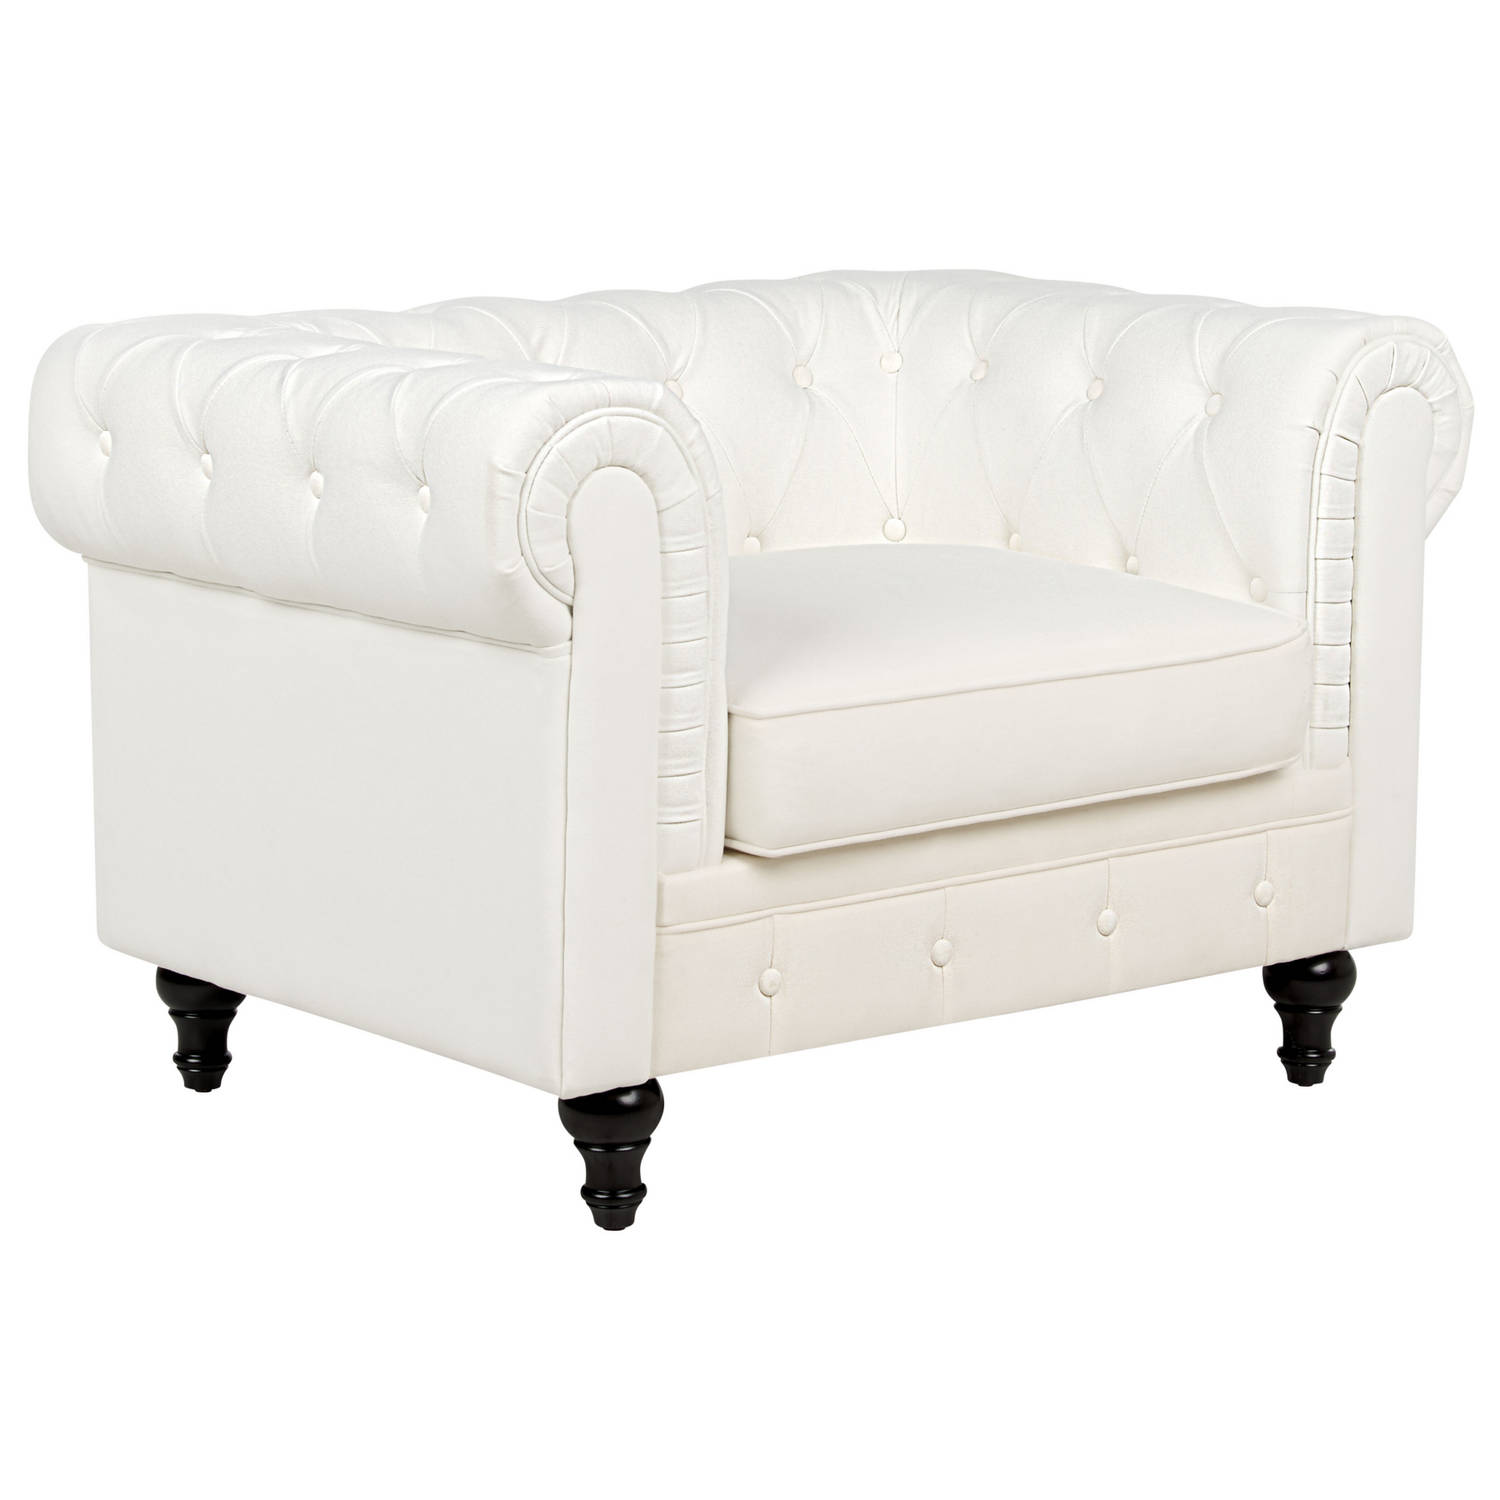 CHESTERFIELD - Chesterfield fauteuil - Wit - Polyester